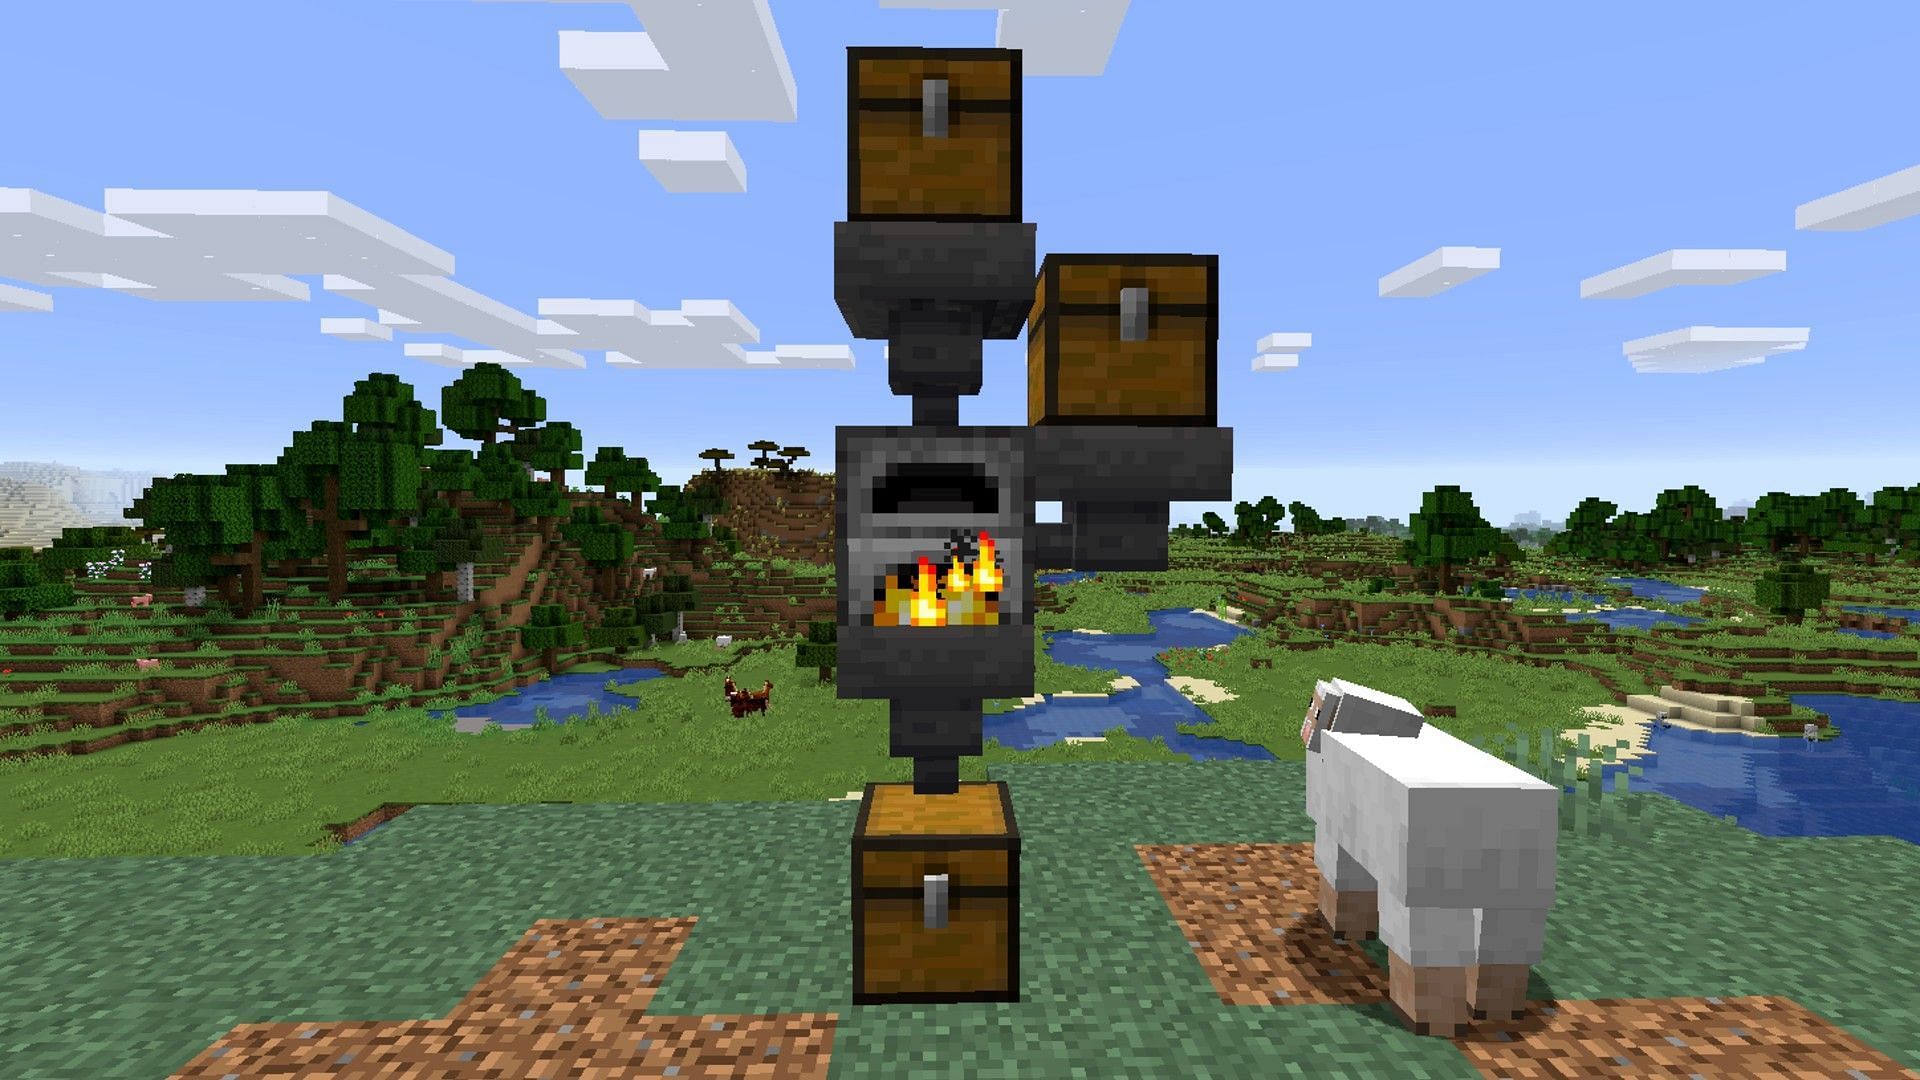 An automatic furnace build with the help of hoppers (Image via Minecraft)